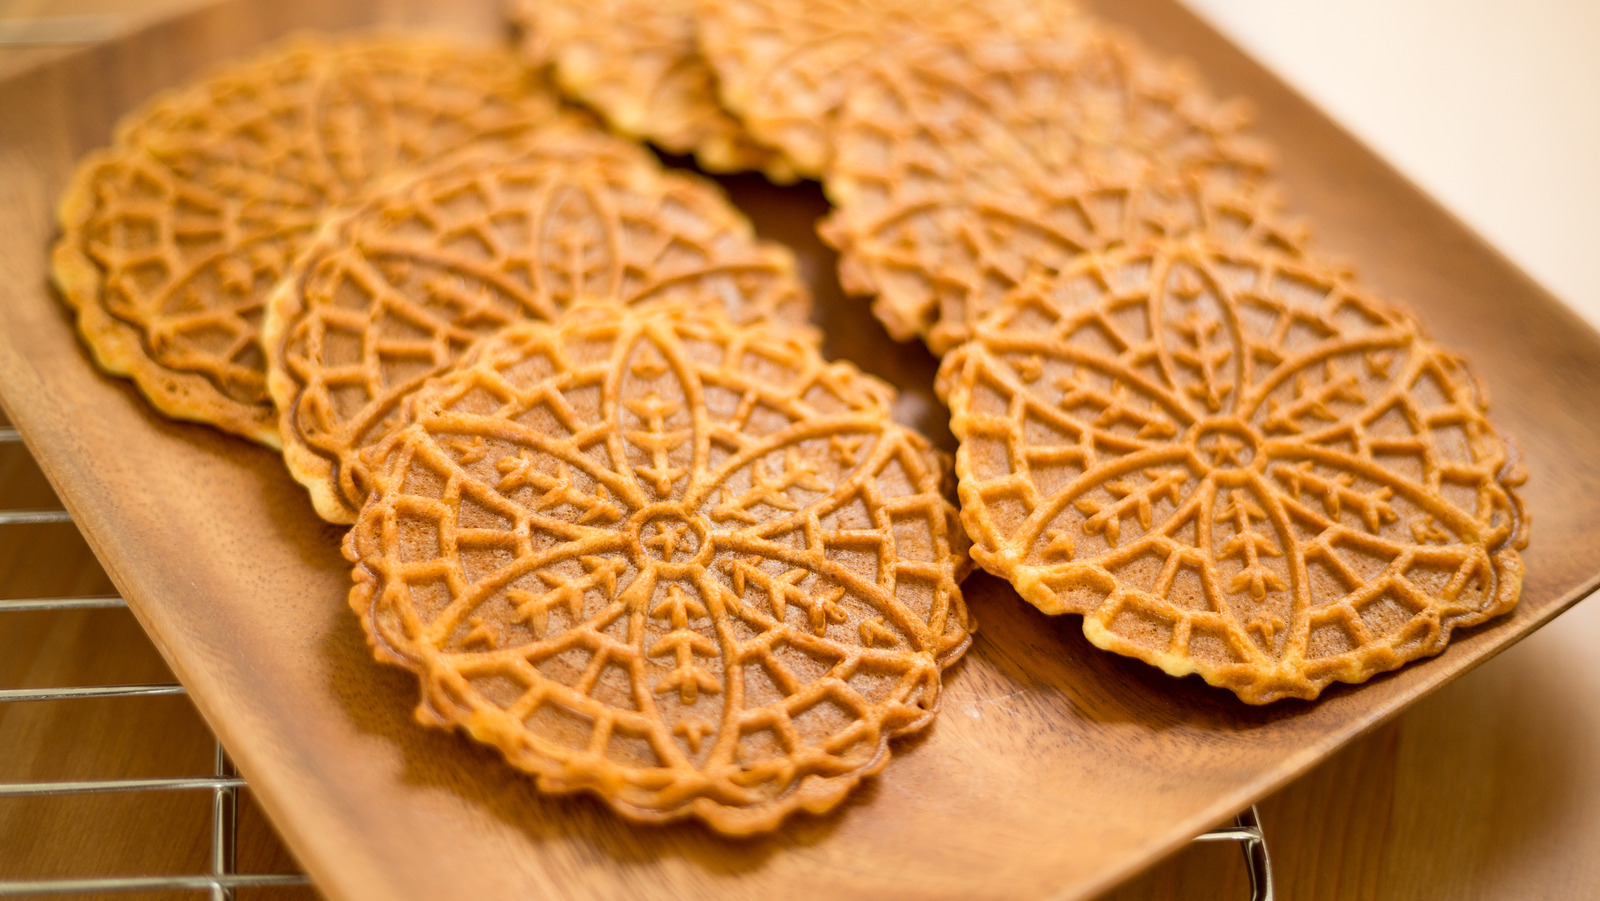 https://www.tastingtable.com/img/gallery/the-possible-8th-century-origins-of-pizzelle-cookies/l-intro-1669661842.jpg